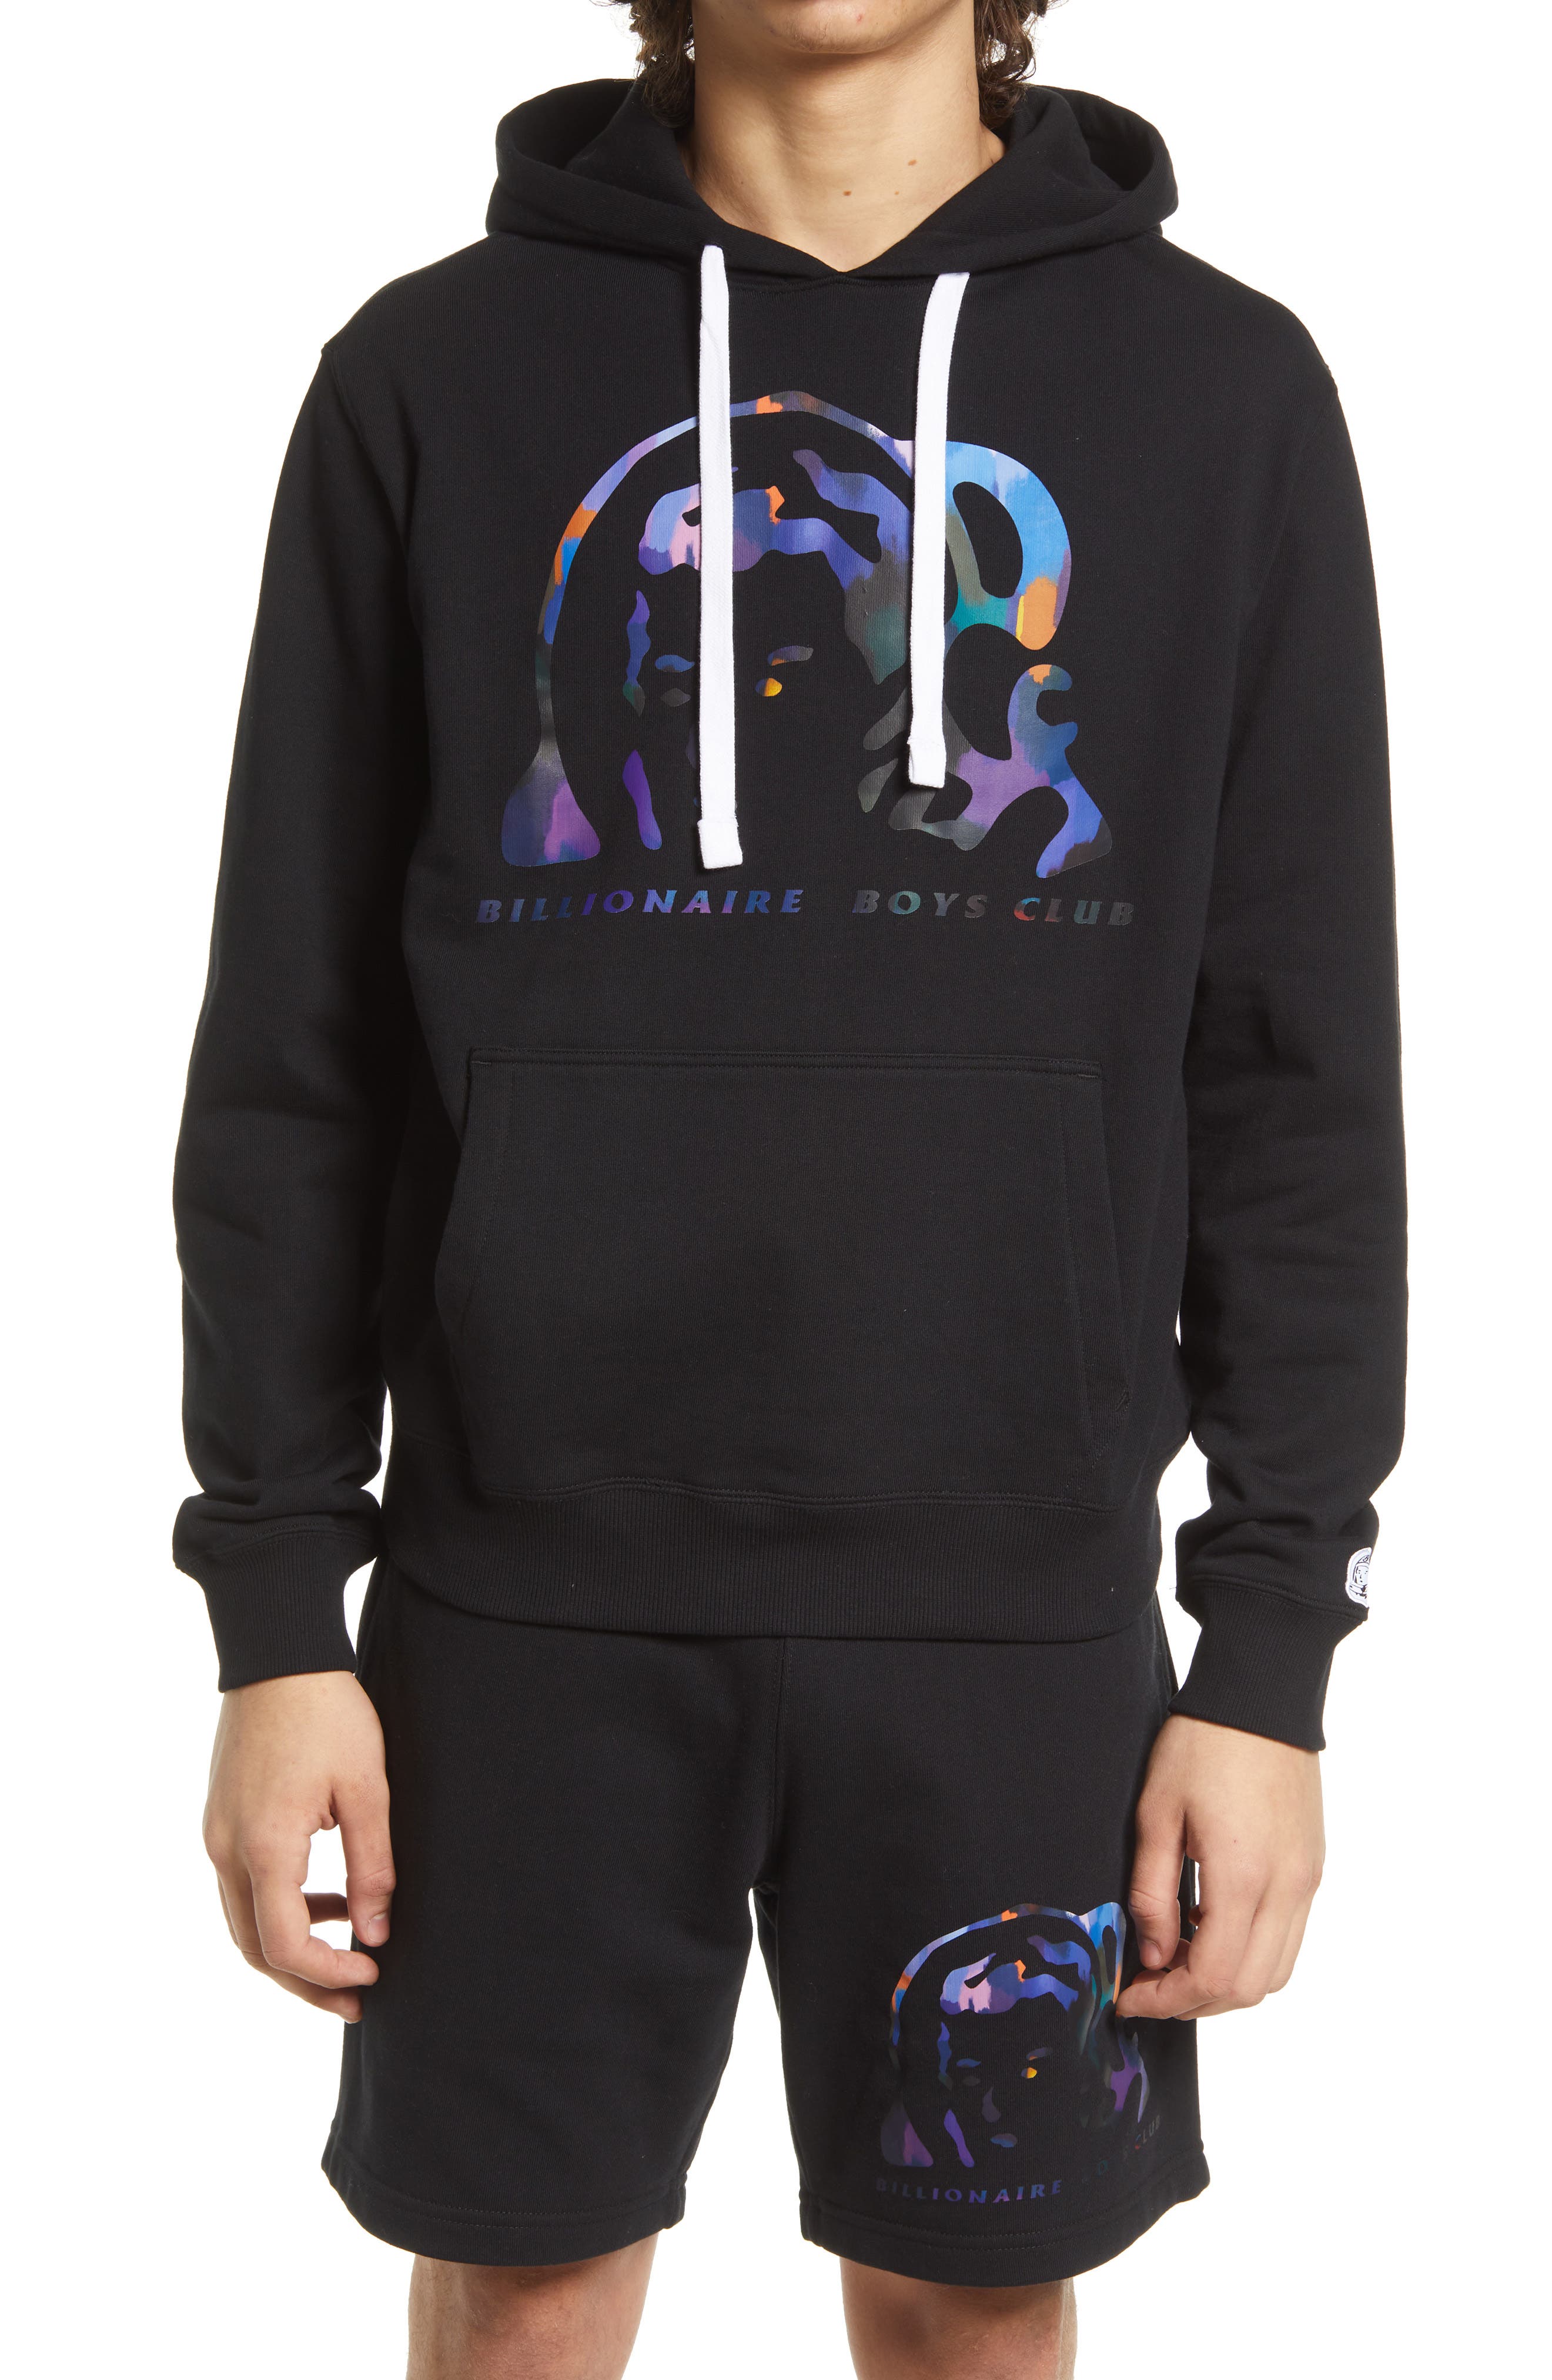 Billionaire Boys Club Mission Command Hoodie in Black at Nordstrom, Size Medium